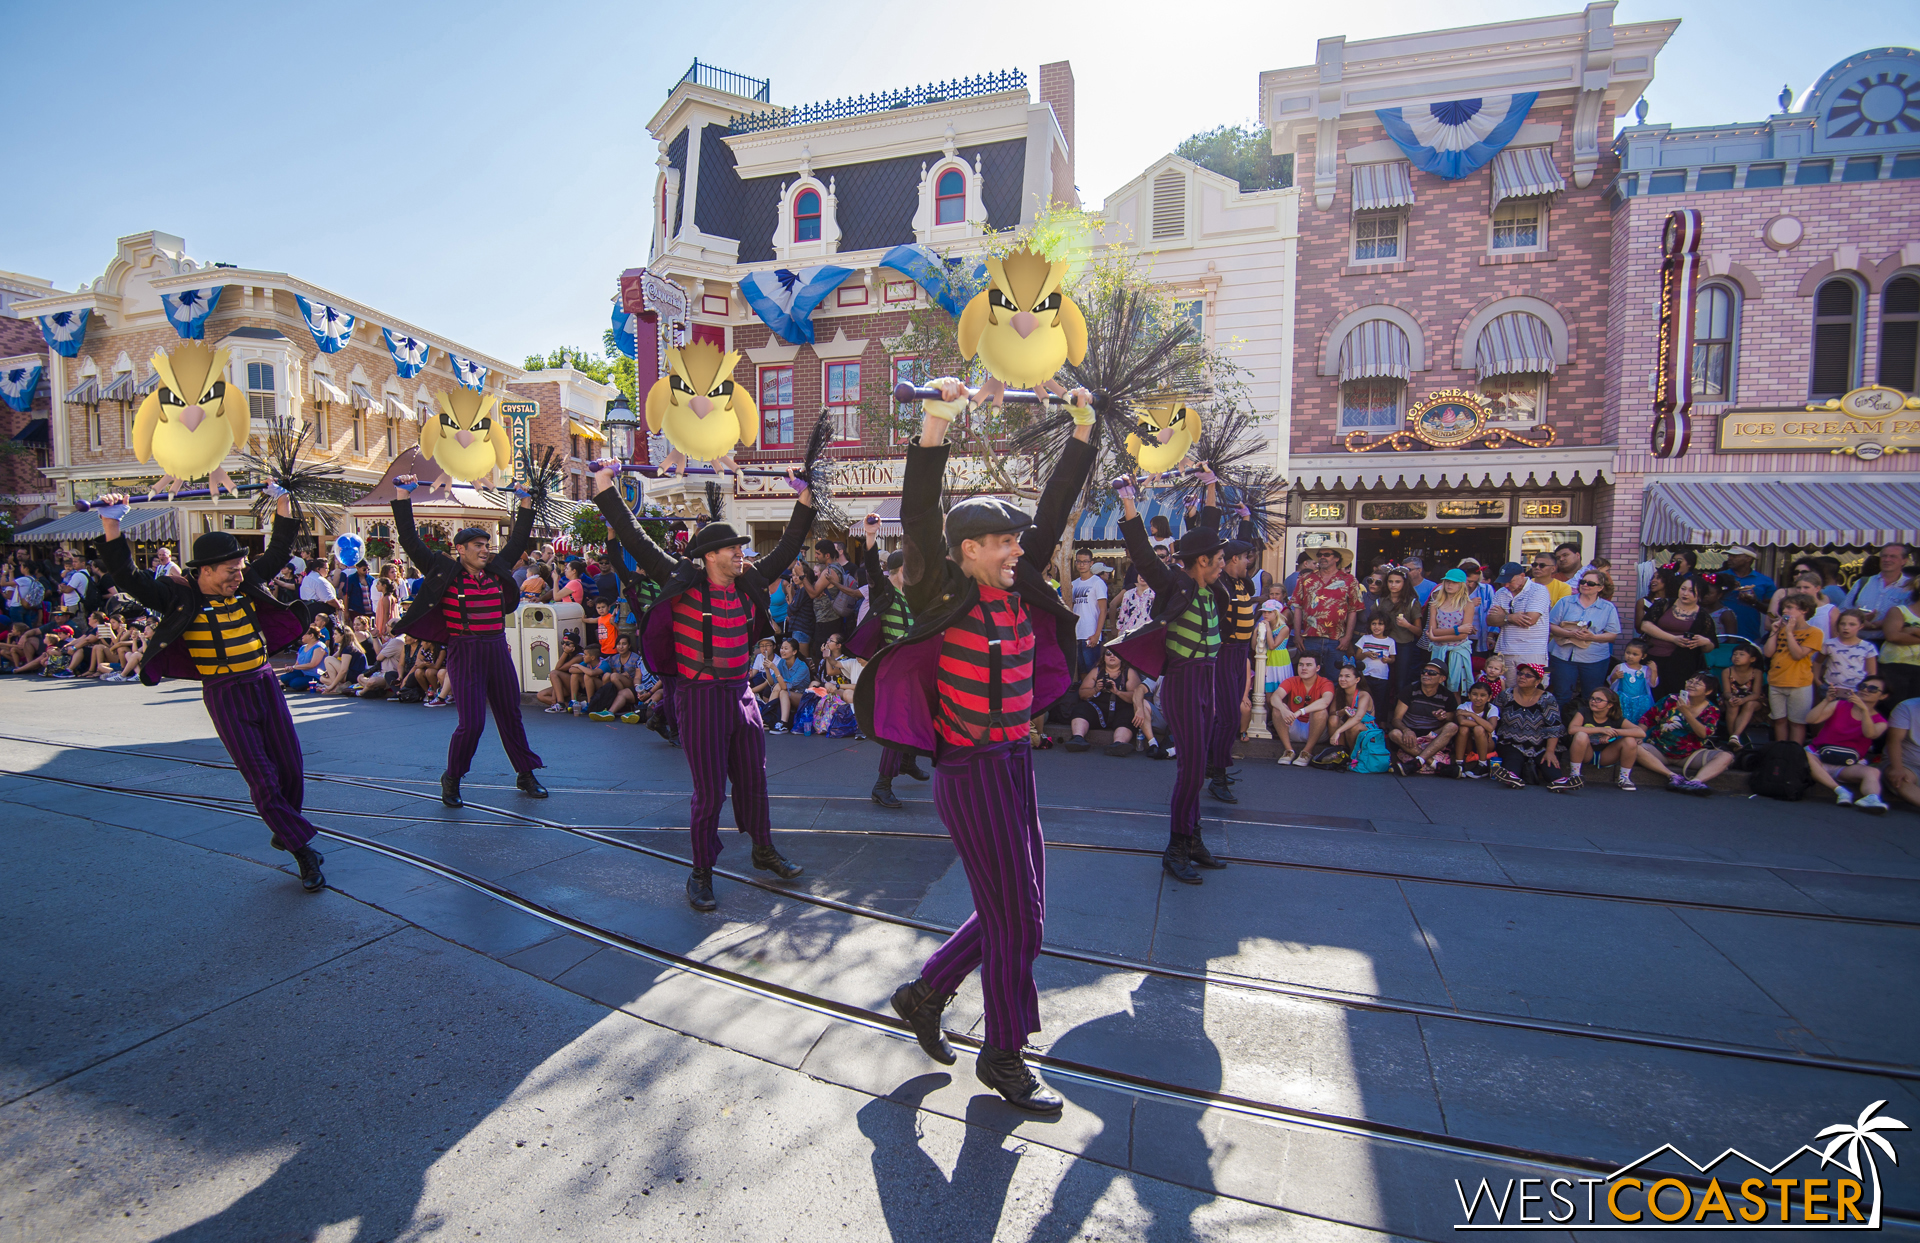  Mickey's Soundsational parade, though?&nbsp; Seems like it's not going anywhere. 